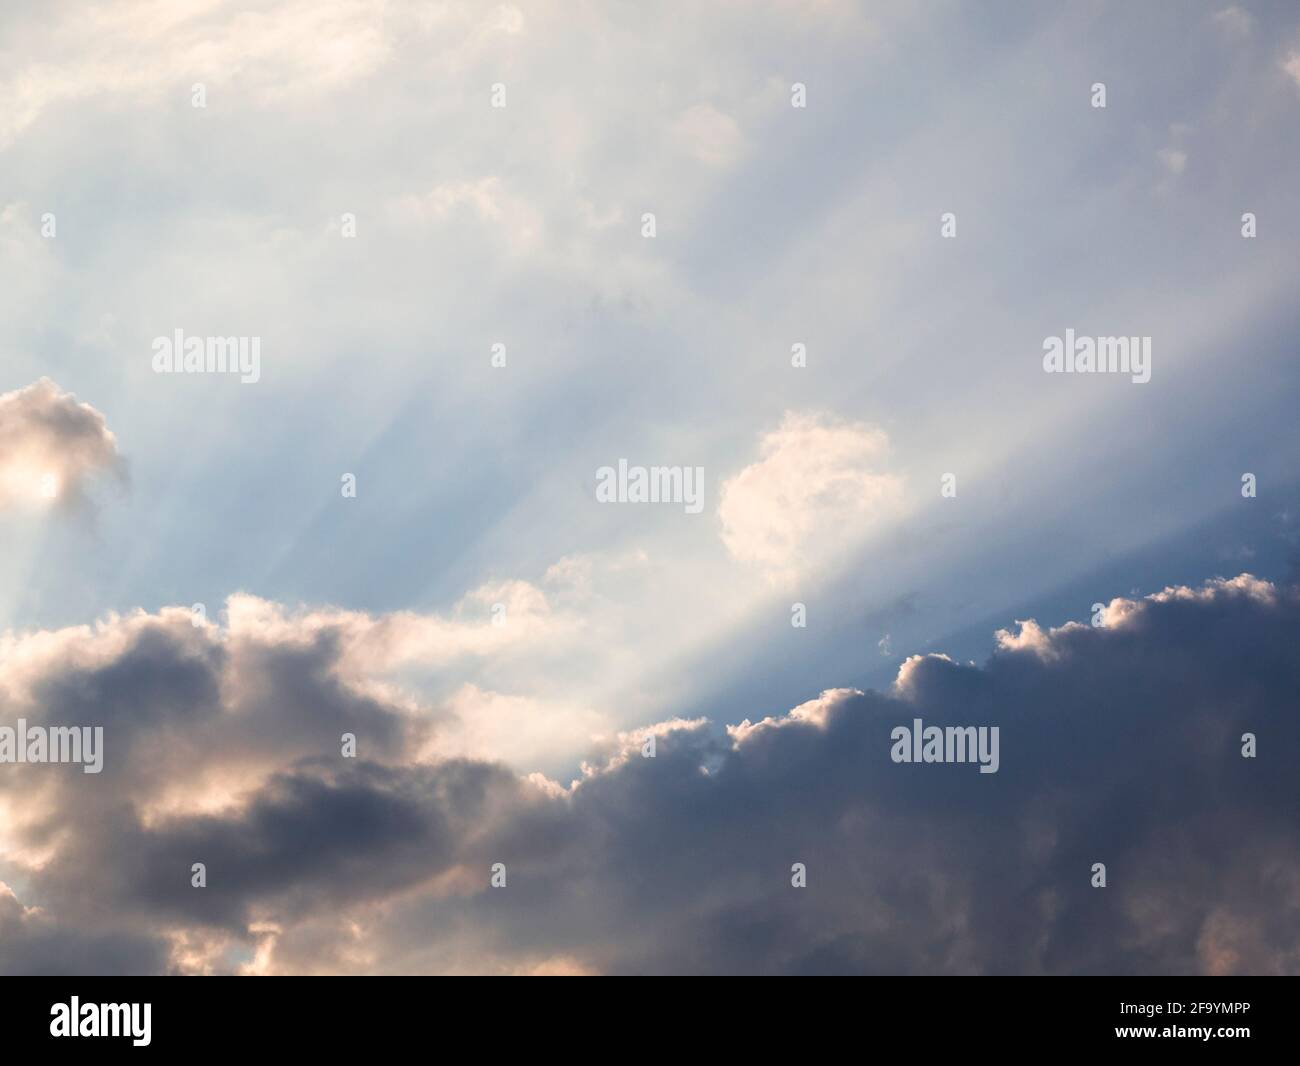 Crepuscular rays from the setting sun through clouds caused by particles in the atmosphere. Stock Photo